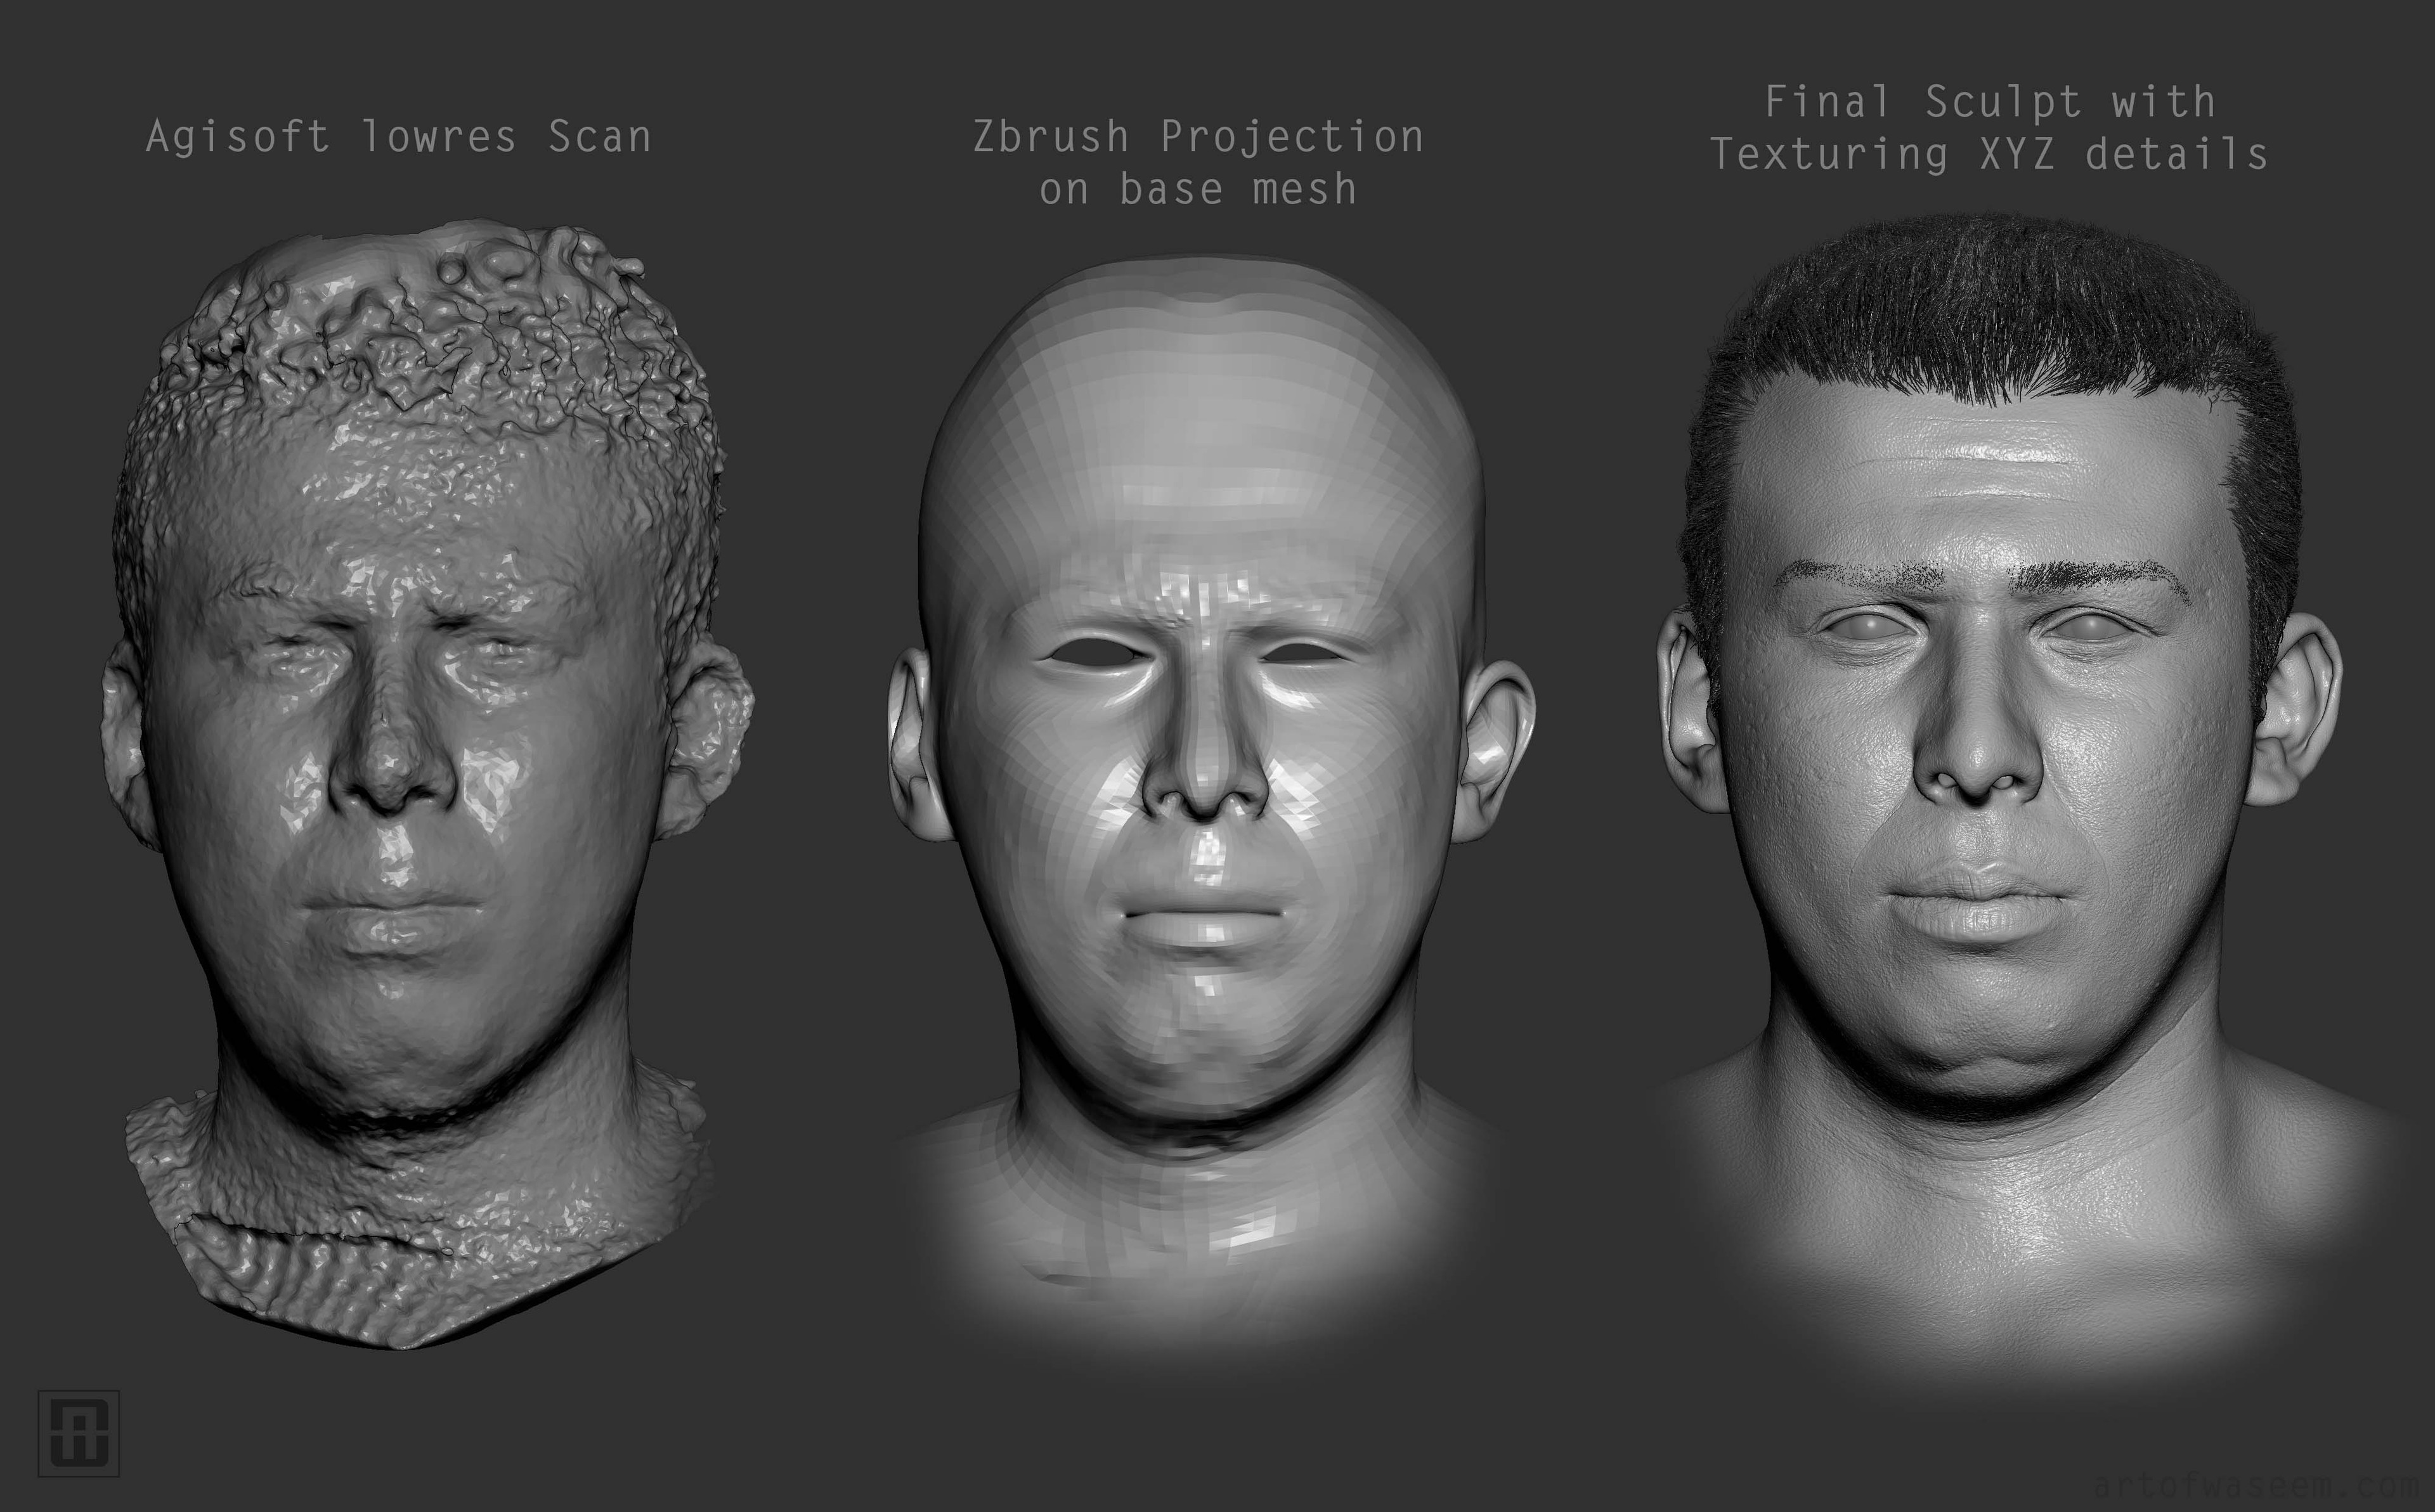 Process from Scan to Finished Sculpt.